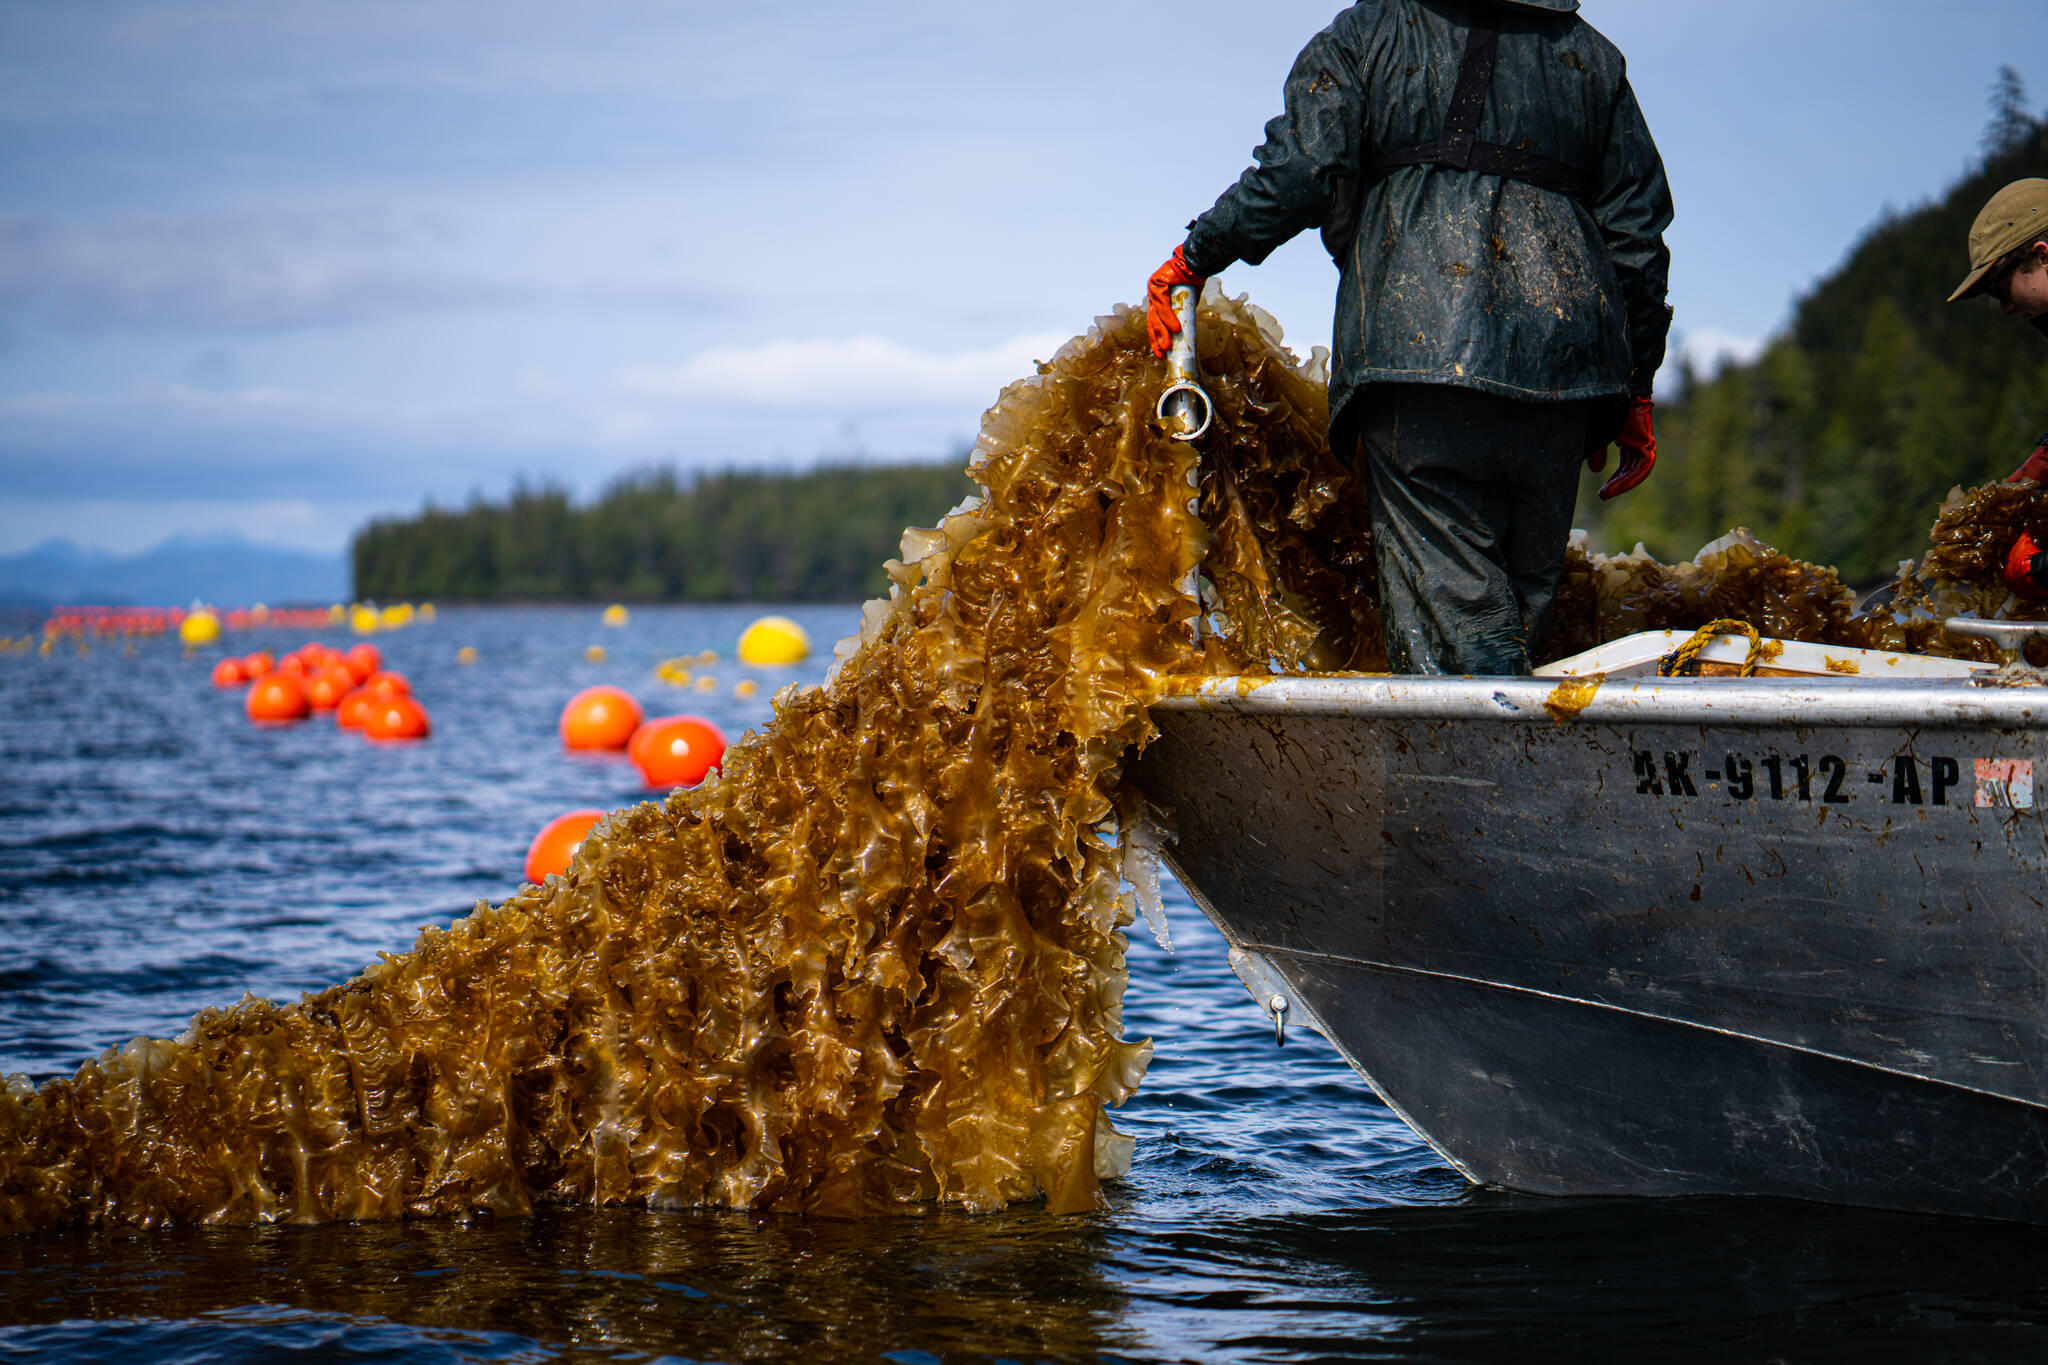 Courtesy Photos / Bethany Goodrich
Mariculture is an industry with potential to develop in ways that align with the unique seasonal rhythms, priorities, and workforce of Alaska. Photo of Seagrove Kelp Co. on Prince of Wales.